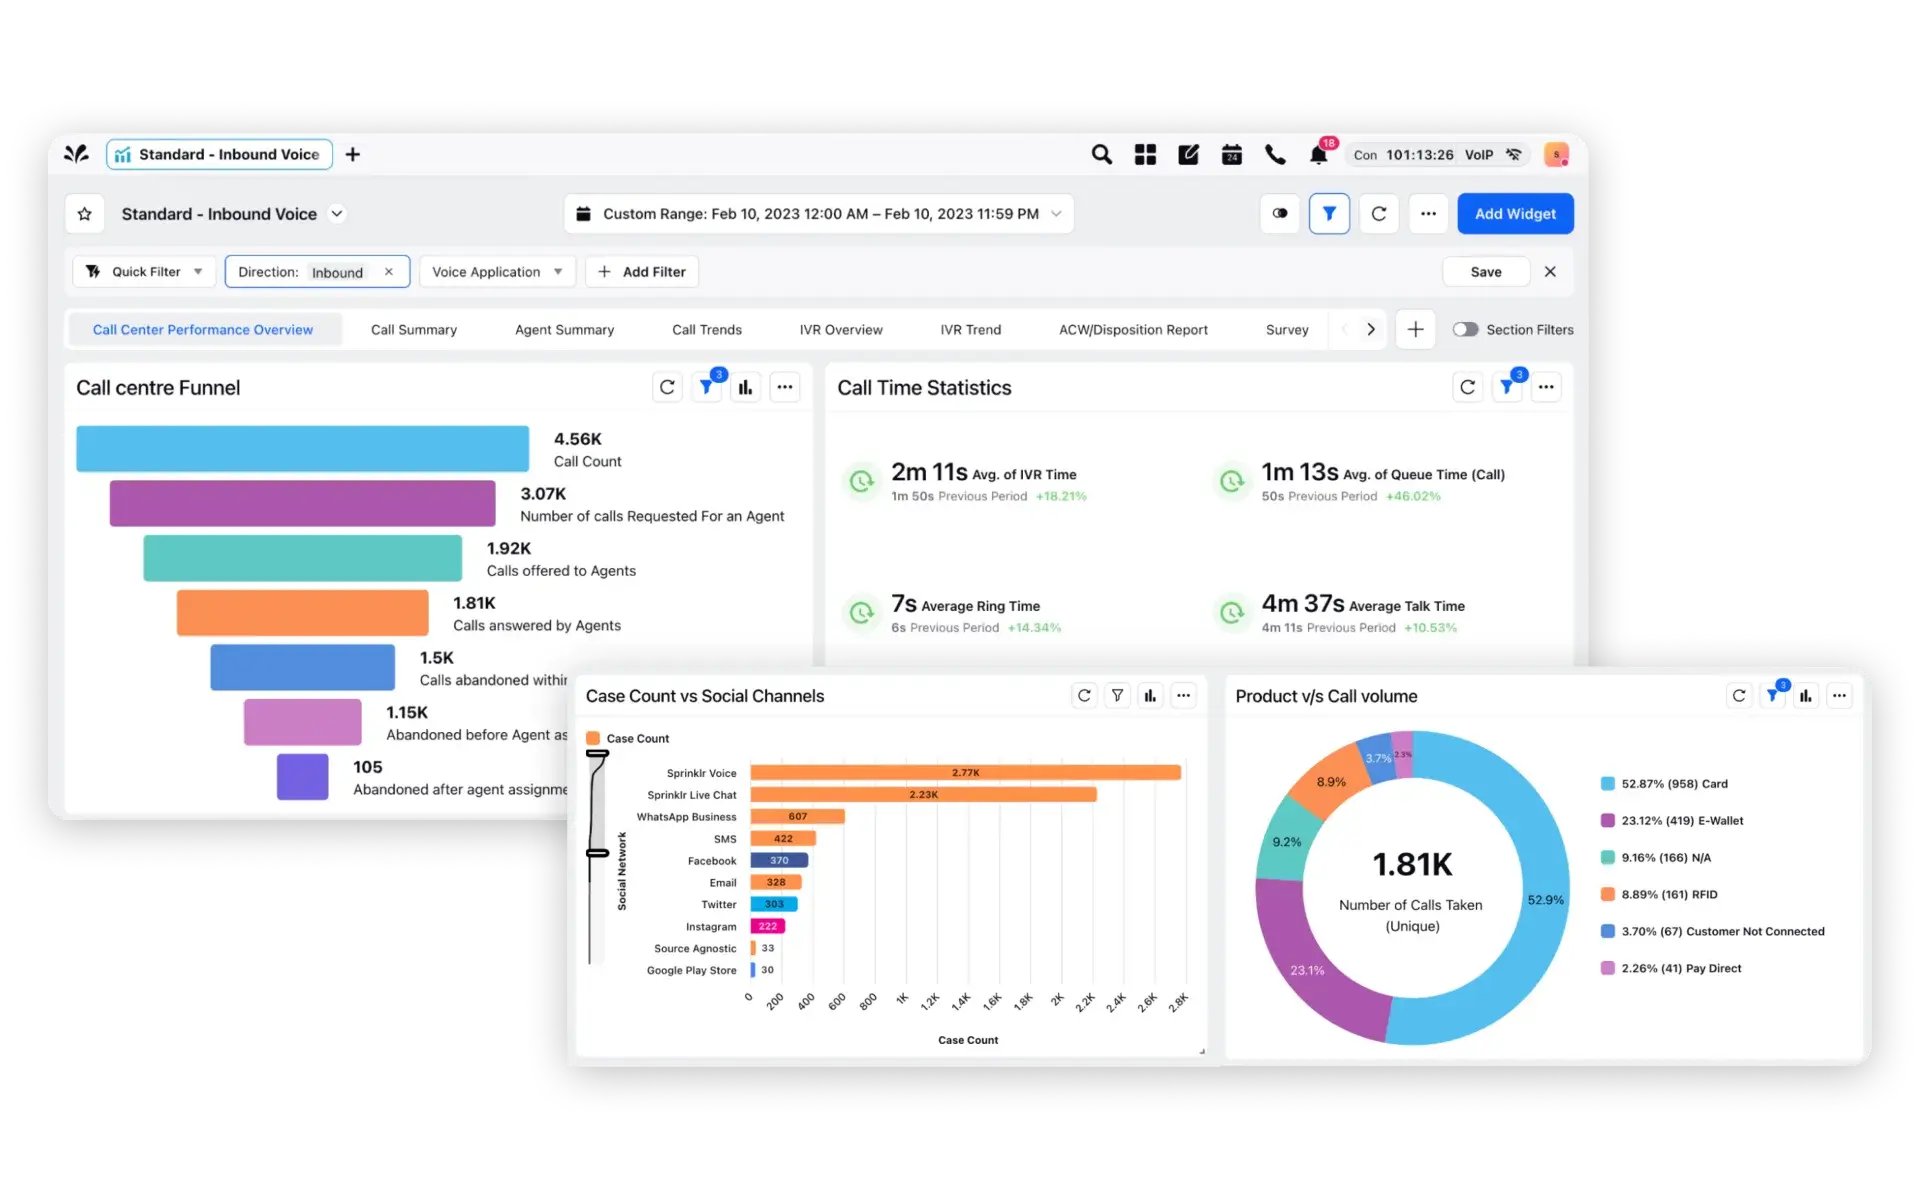 Sprinklr analytics and reporting dashboard for blended call centers